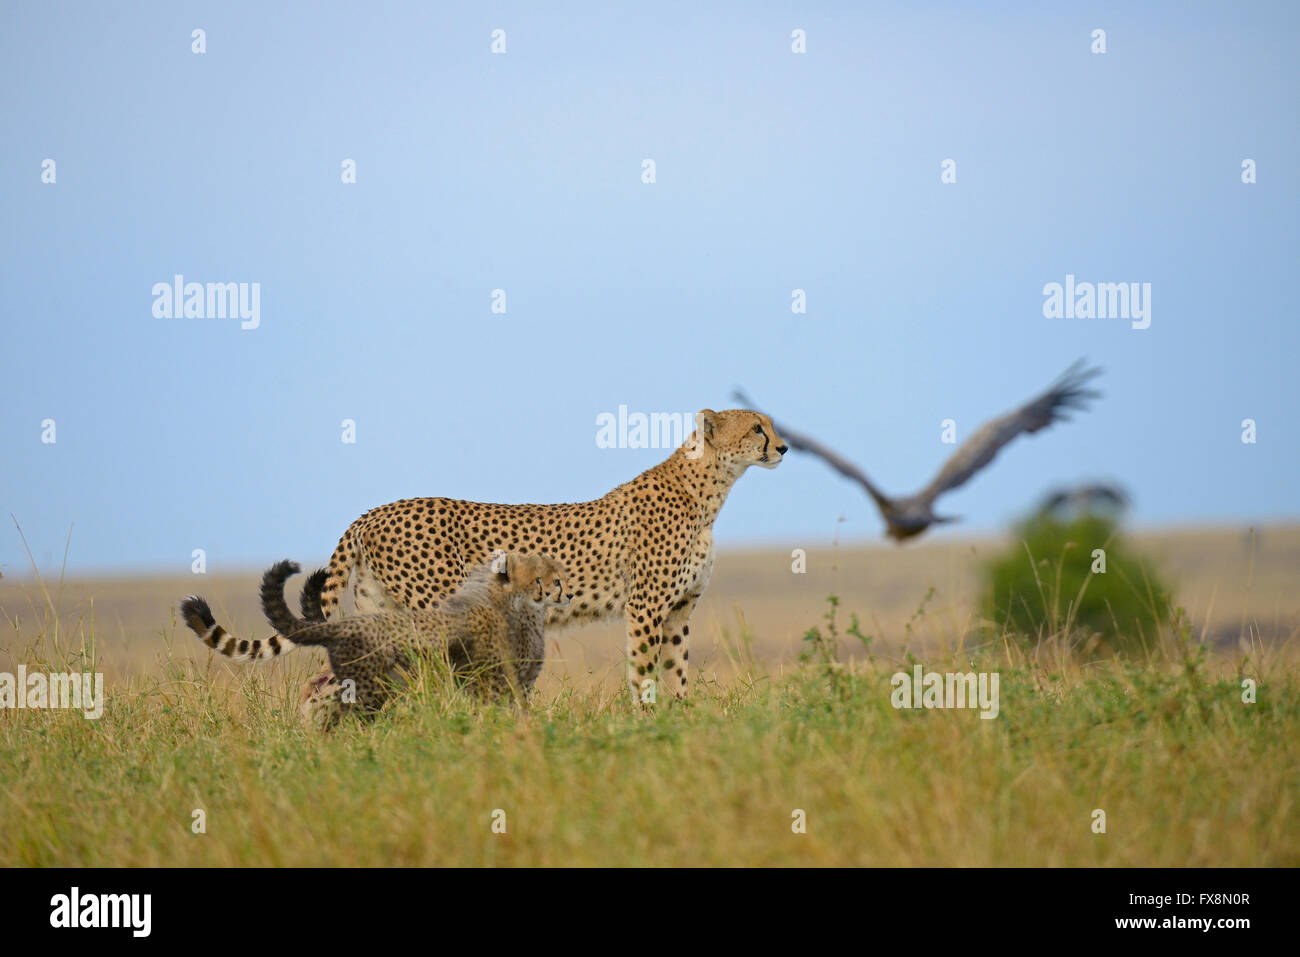 Low angle shot of a Wild cheetah mother with her cubs, walking in the grasslands of Masai Mara in Kenya, Africa Stock Photo